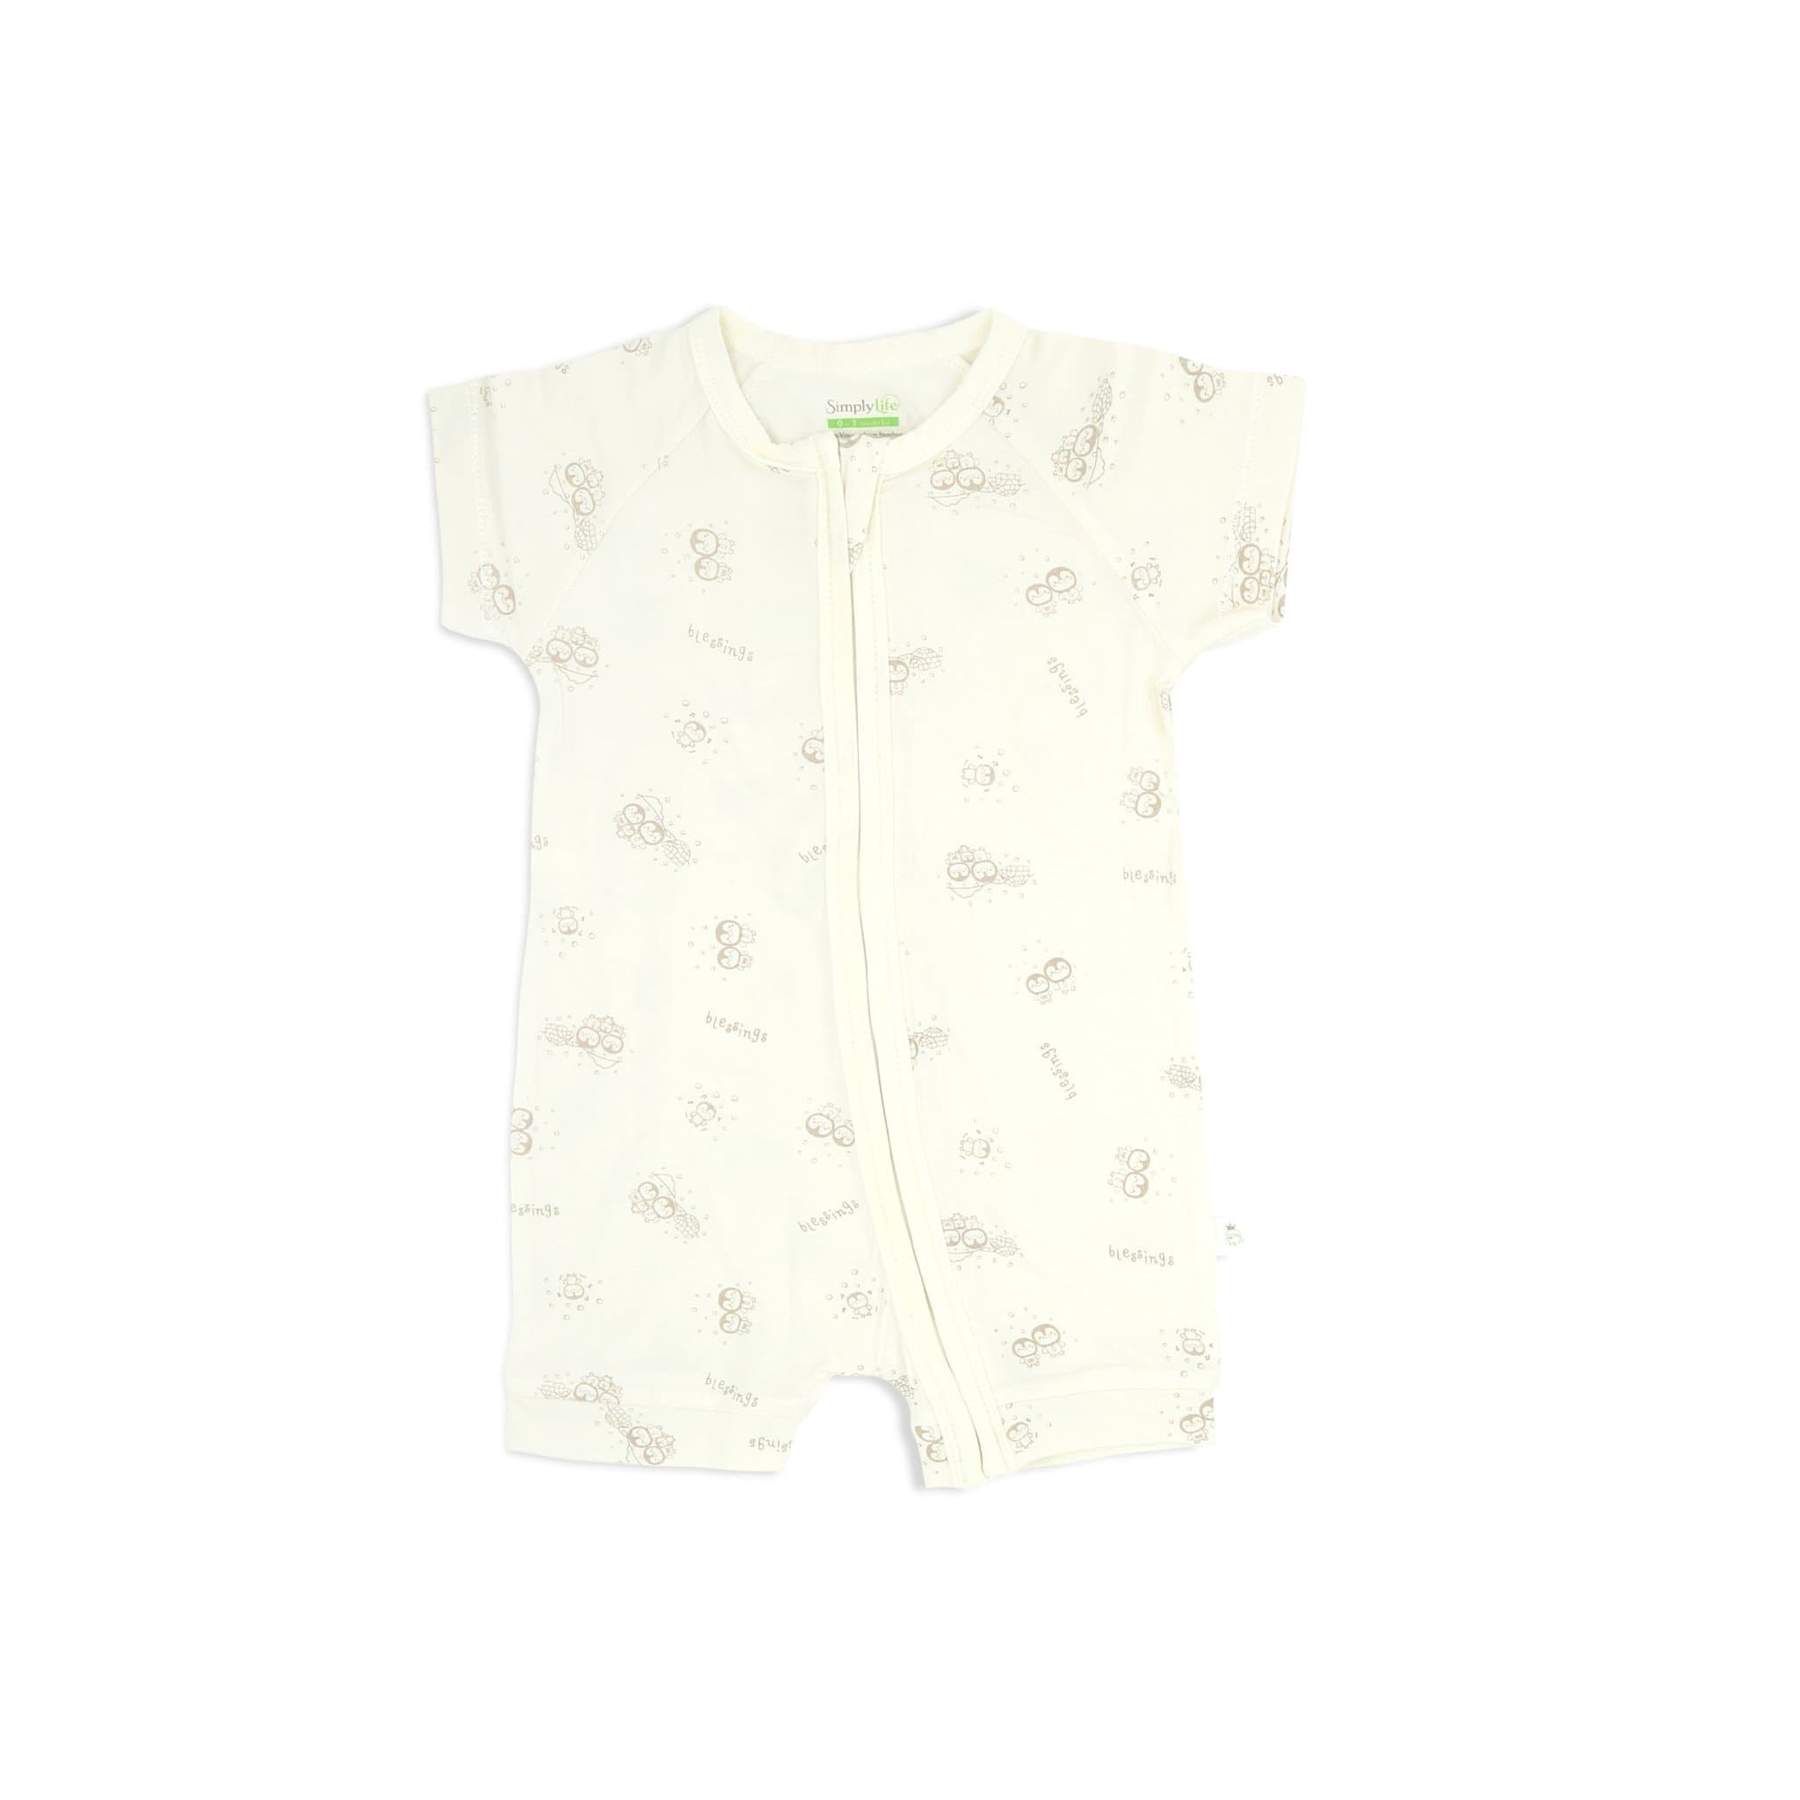 Simply Life Bamboo Shortall Short-Sleeved with Zipper Blessed Penguin (Various Sizes Avail) 